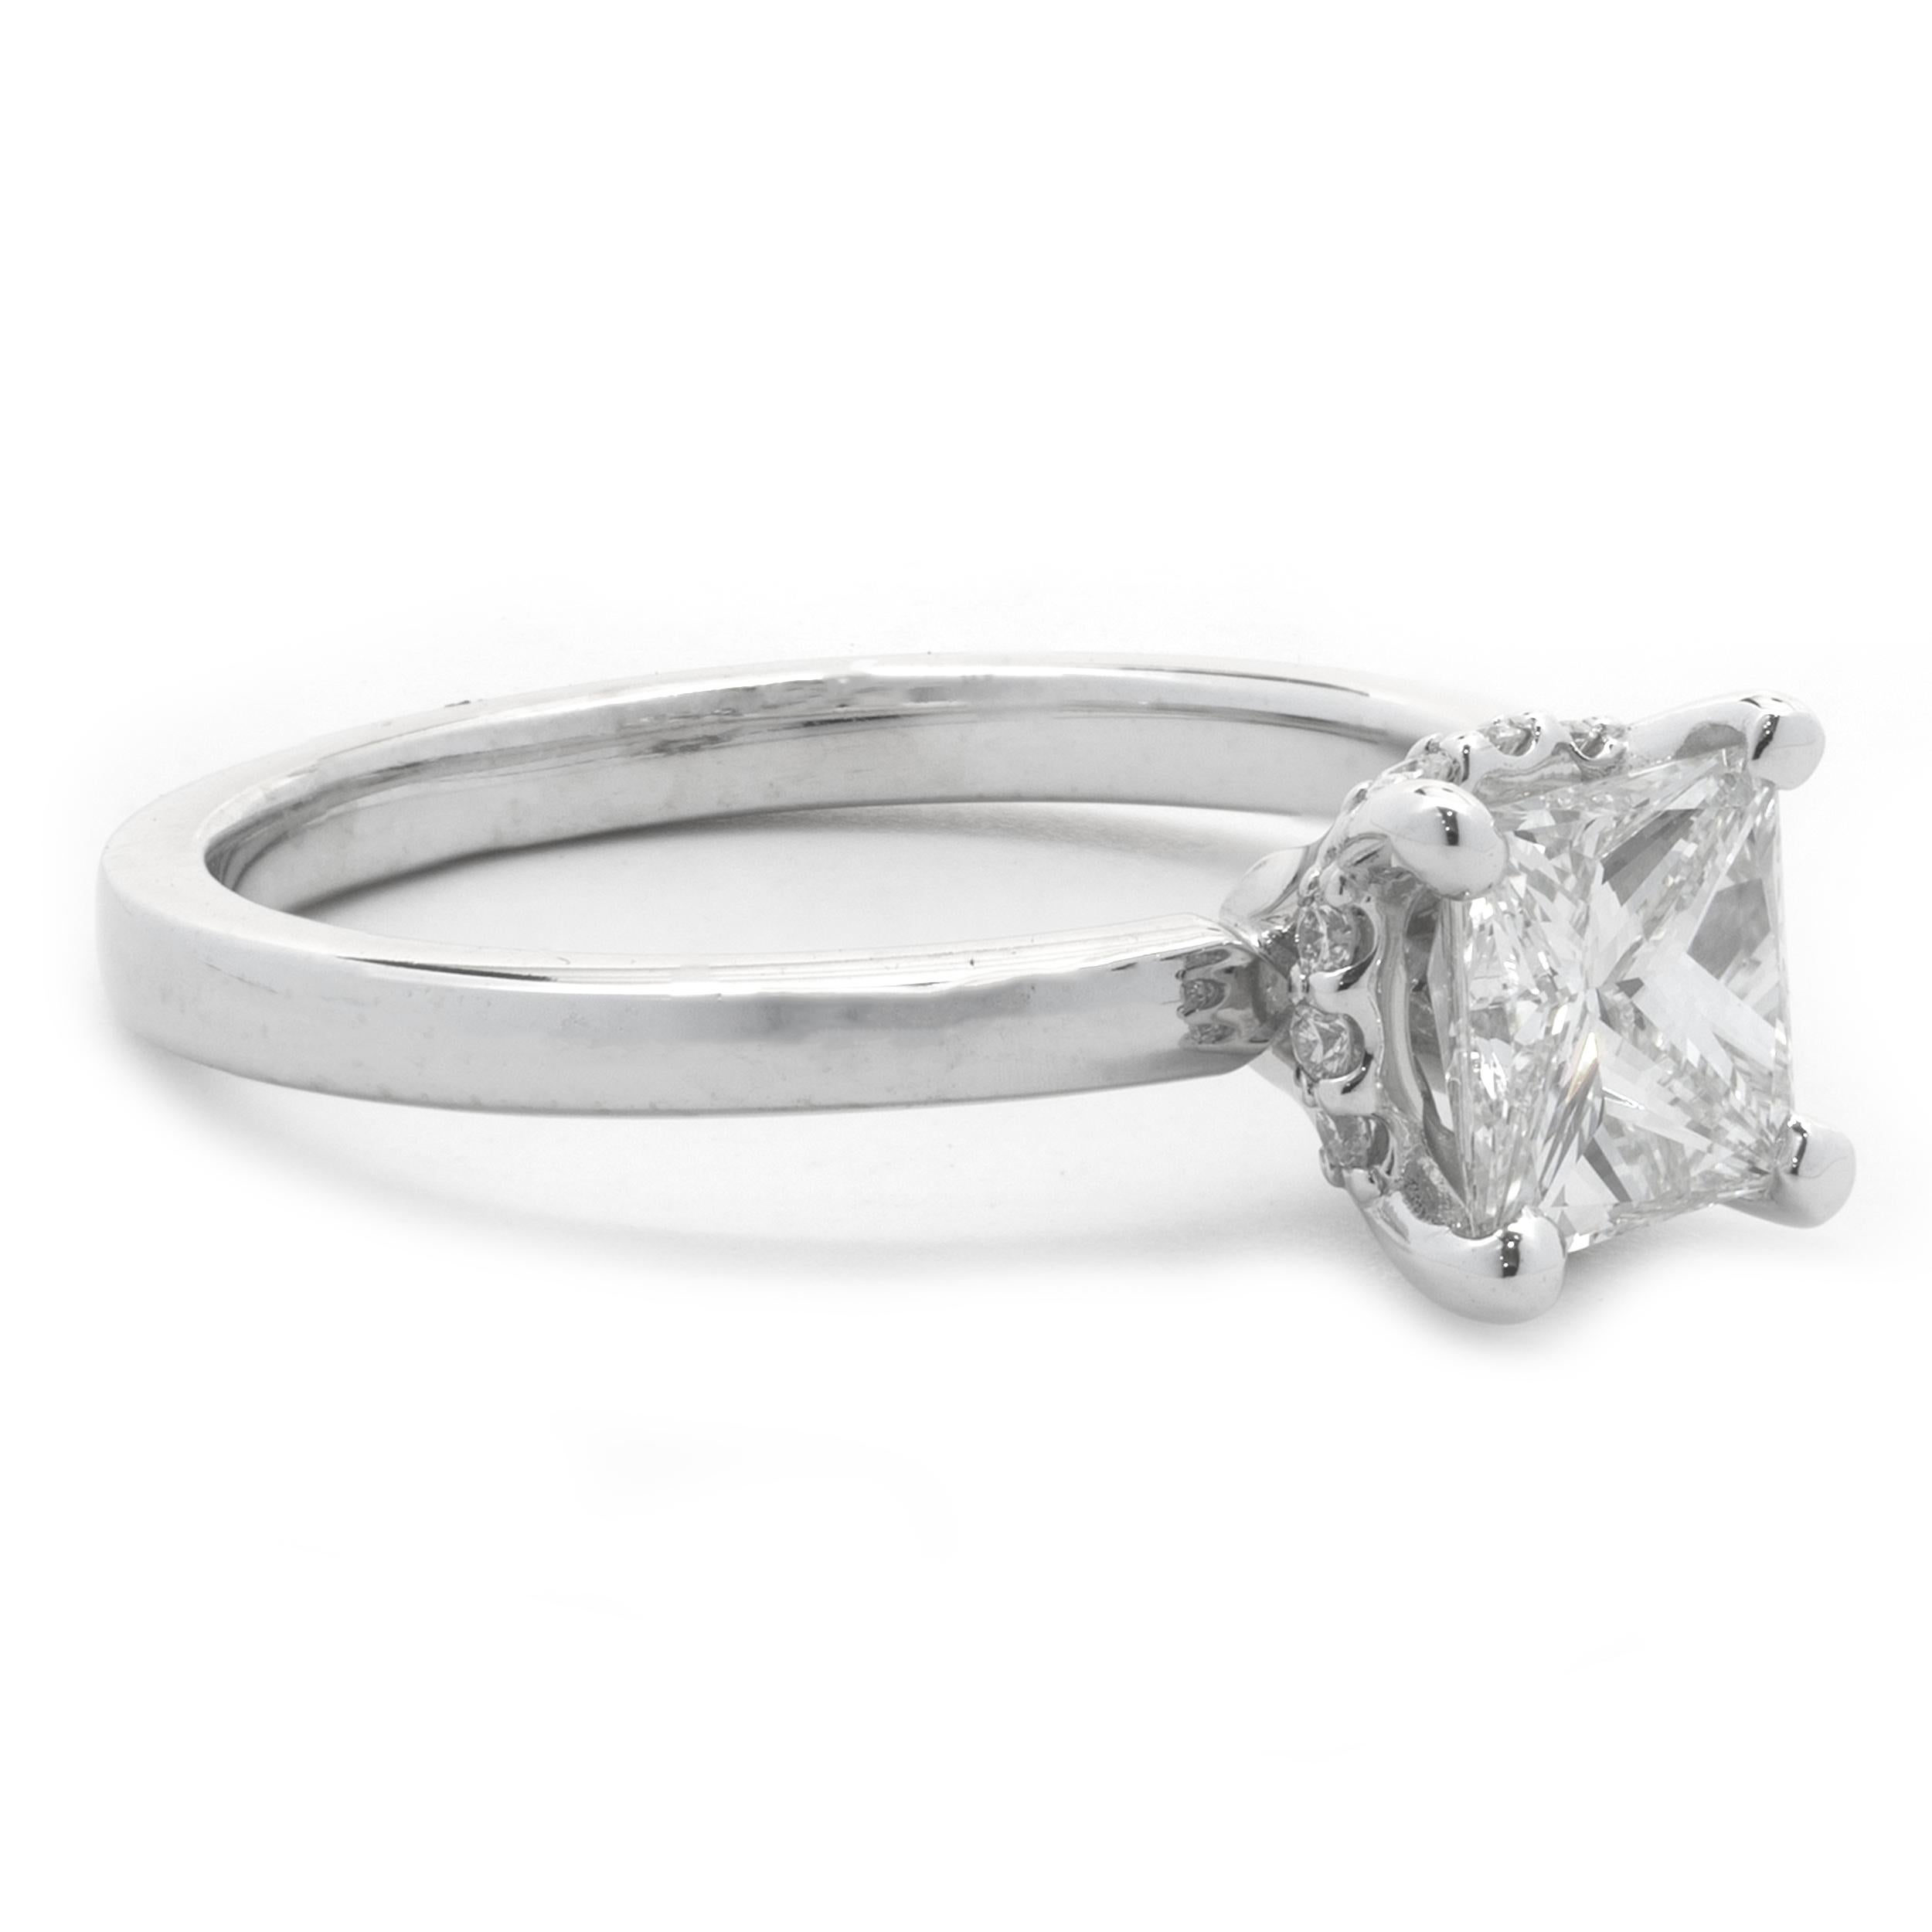 Designer: custom
Material: 14K white gold
Diamond: 1 princess cut = 0.78ct 
Color: I
Clarity: VS2
Diamond: 12 round brilliant cut = .12cttw
Color: G
Clarity: VS2
Ring Size: 5 (please allow up to 2 additional business days for sizing